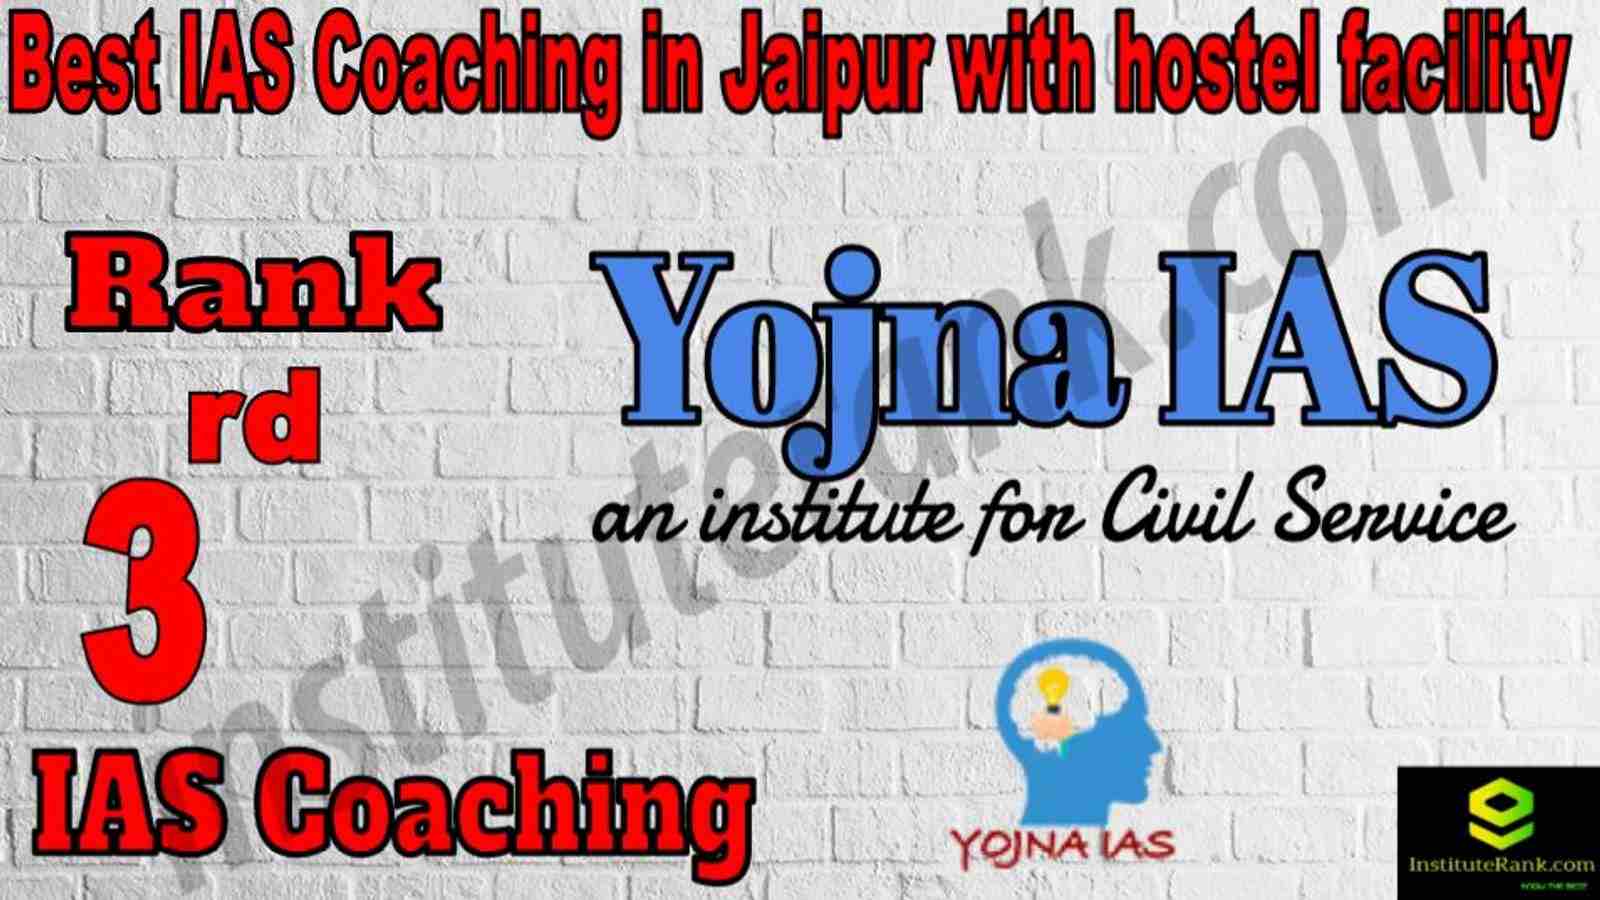 3rd Best IAS Coaching in Jaipur with hostel facility